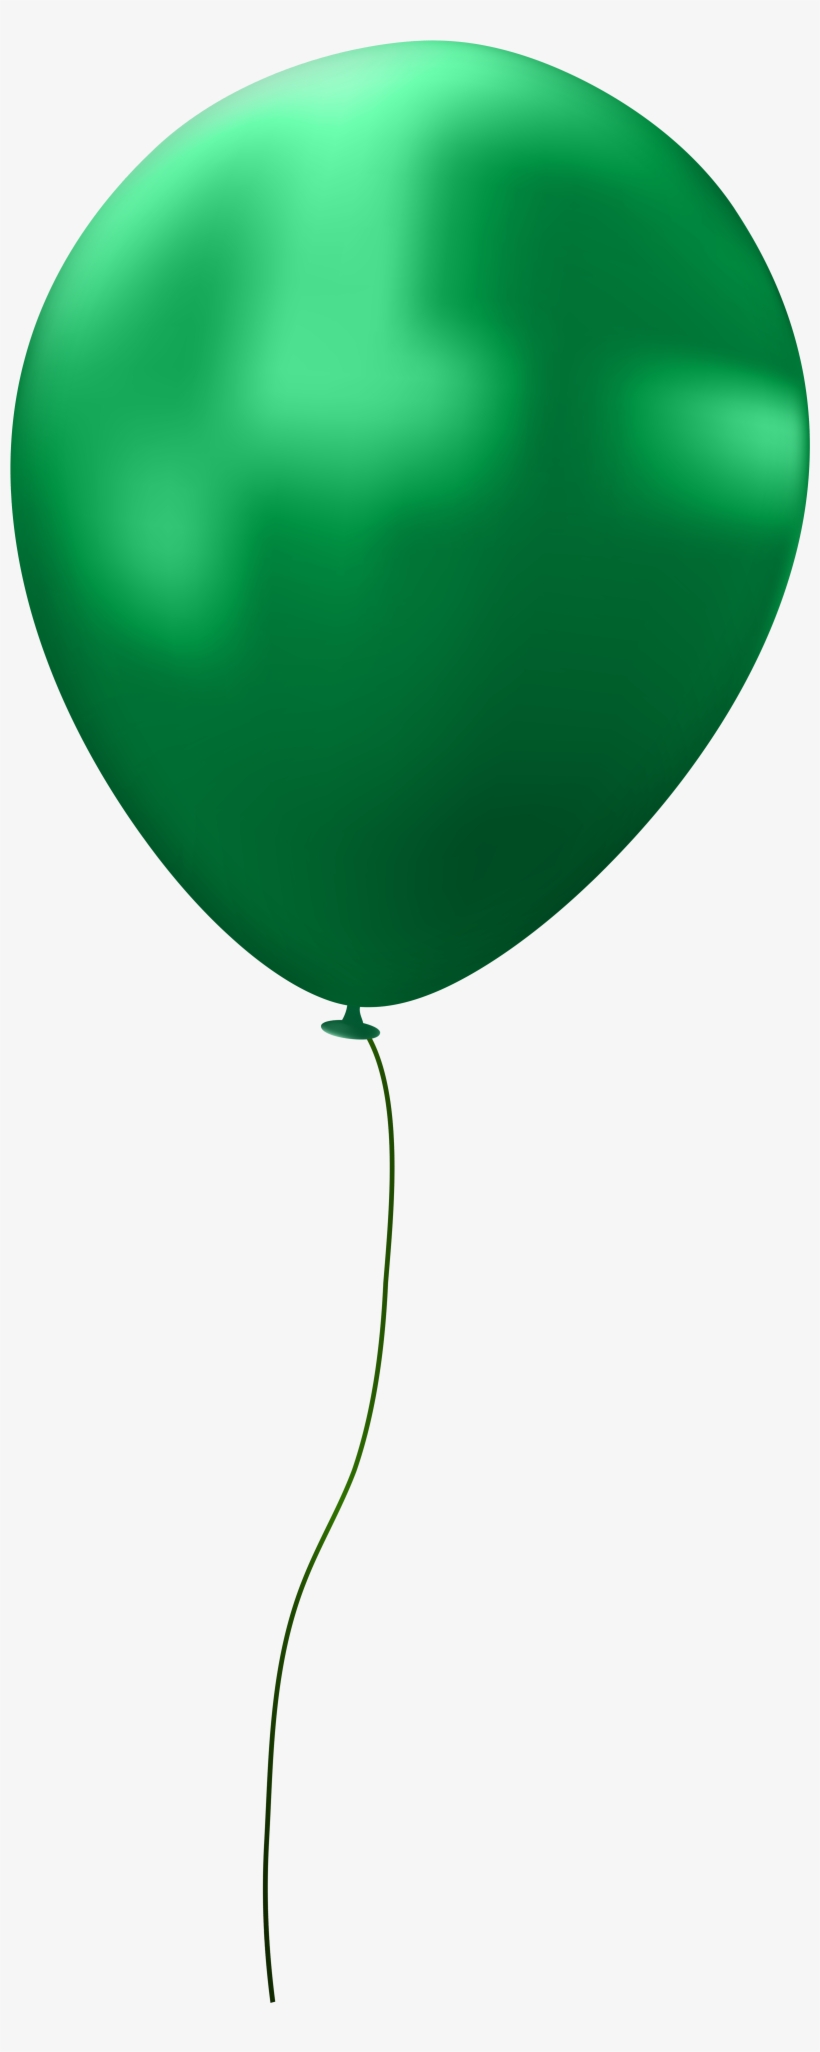 Download Green Single Balloon Png Images Background, transparent png #7058520